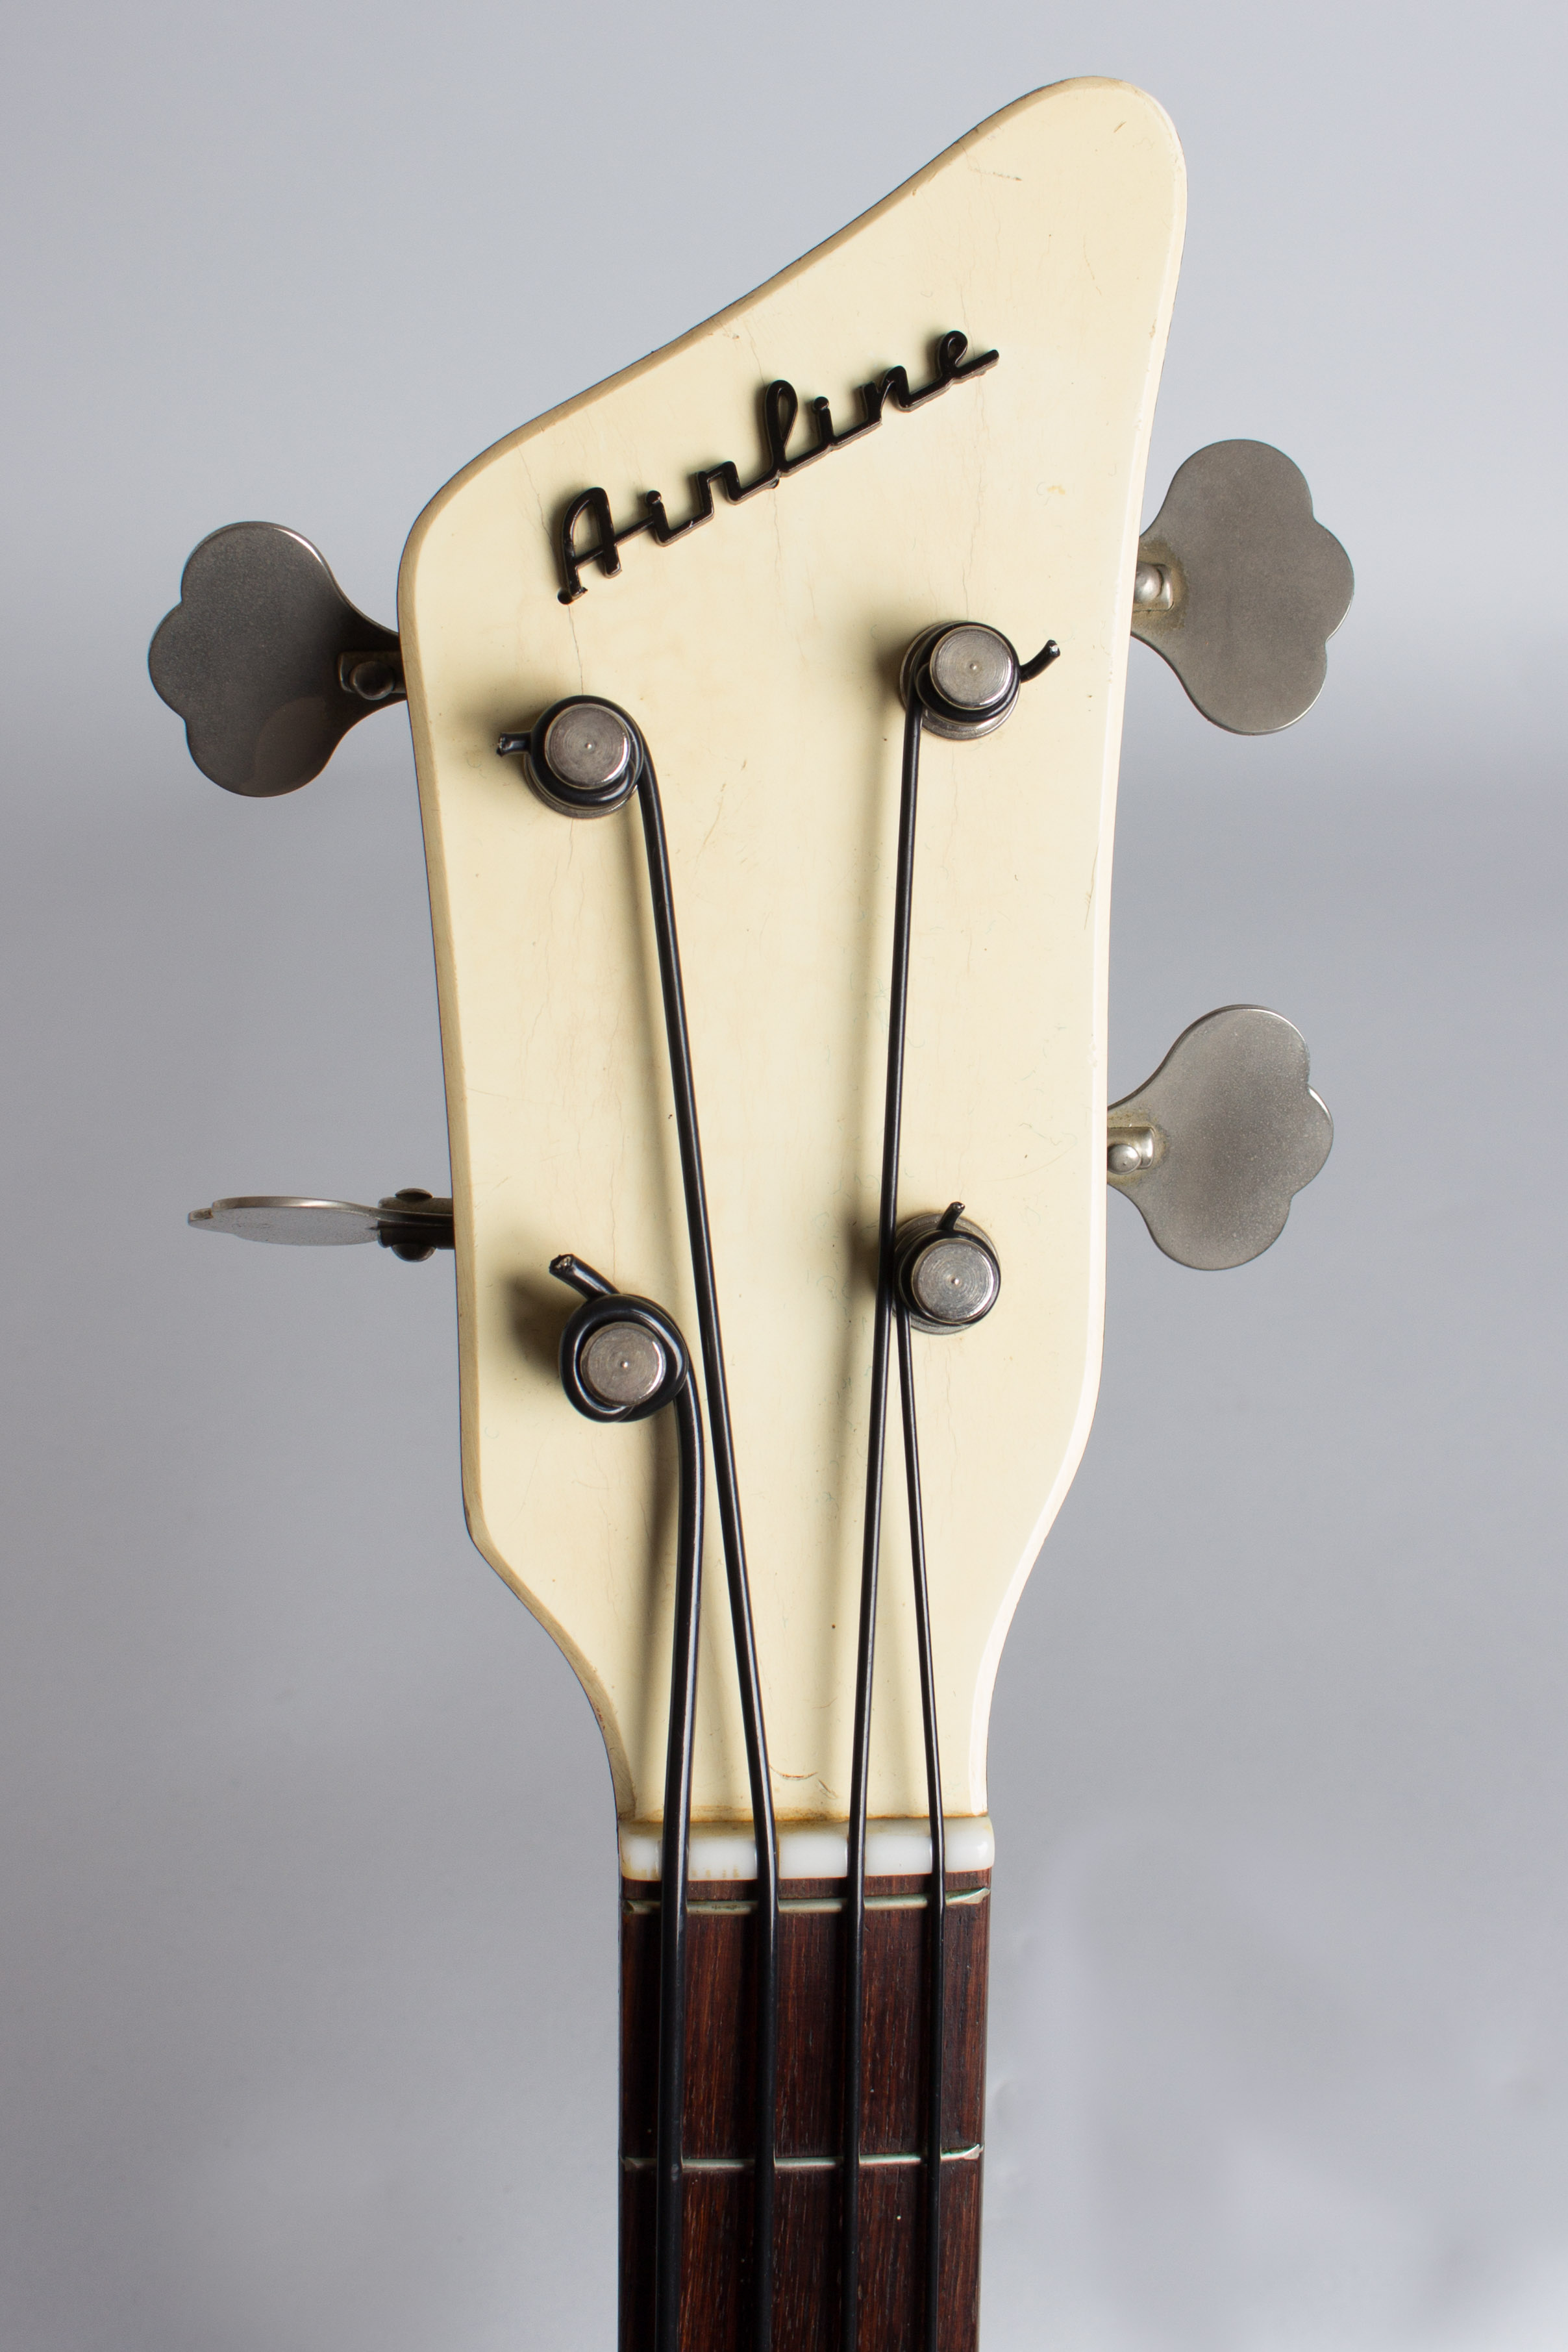 wards airline guitar